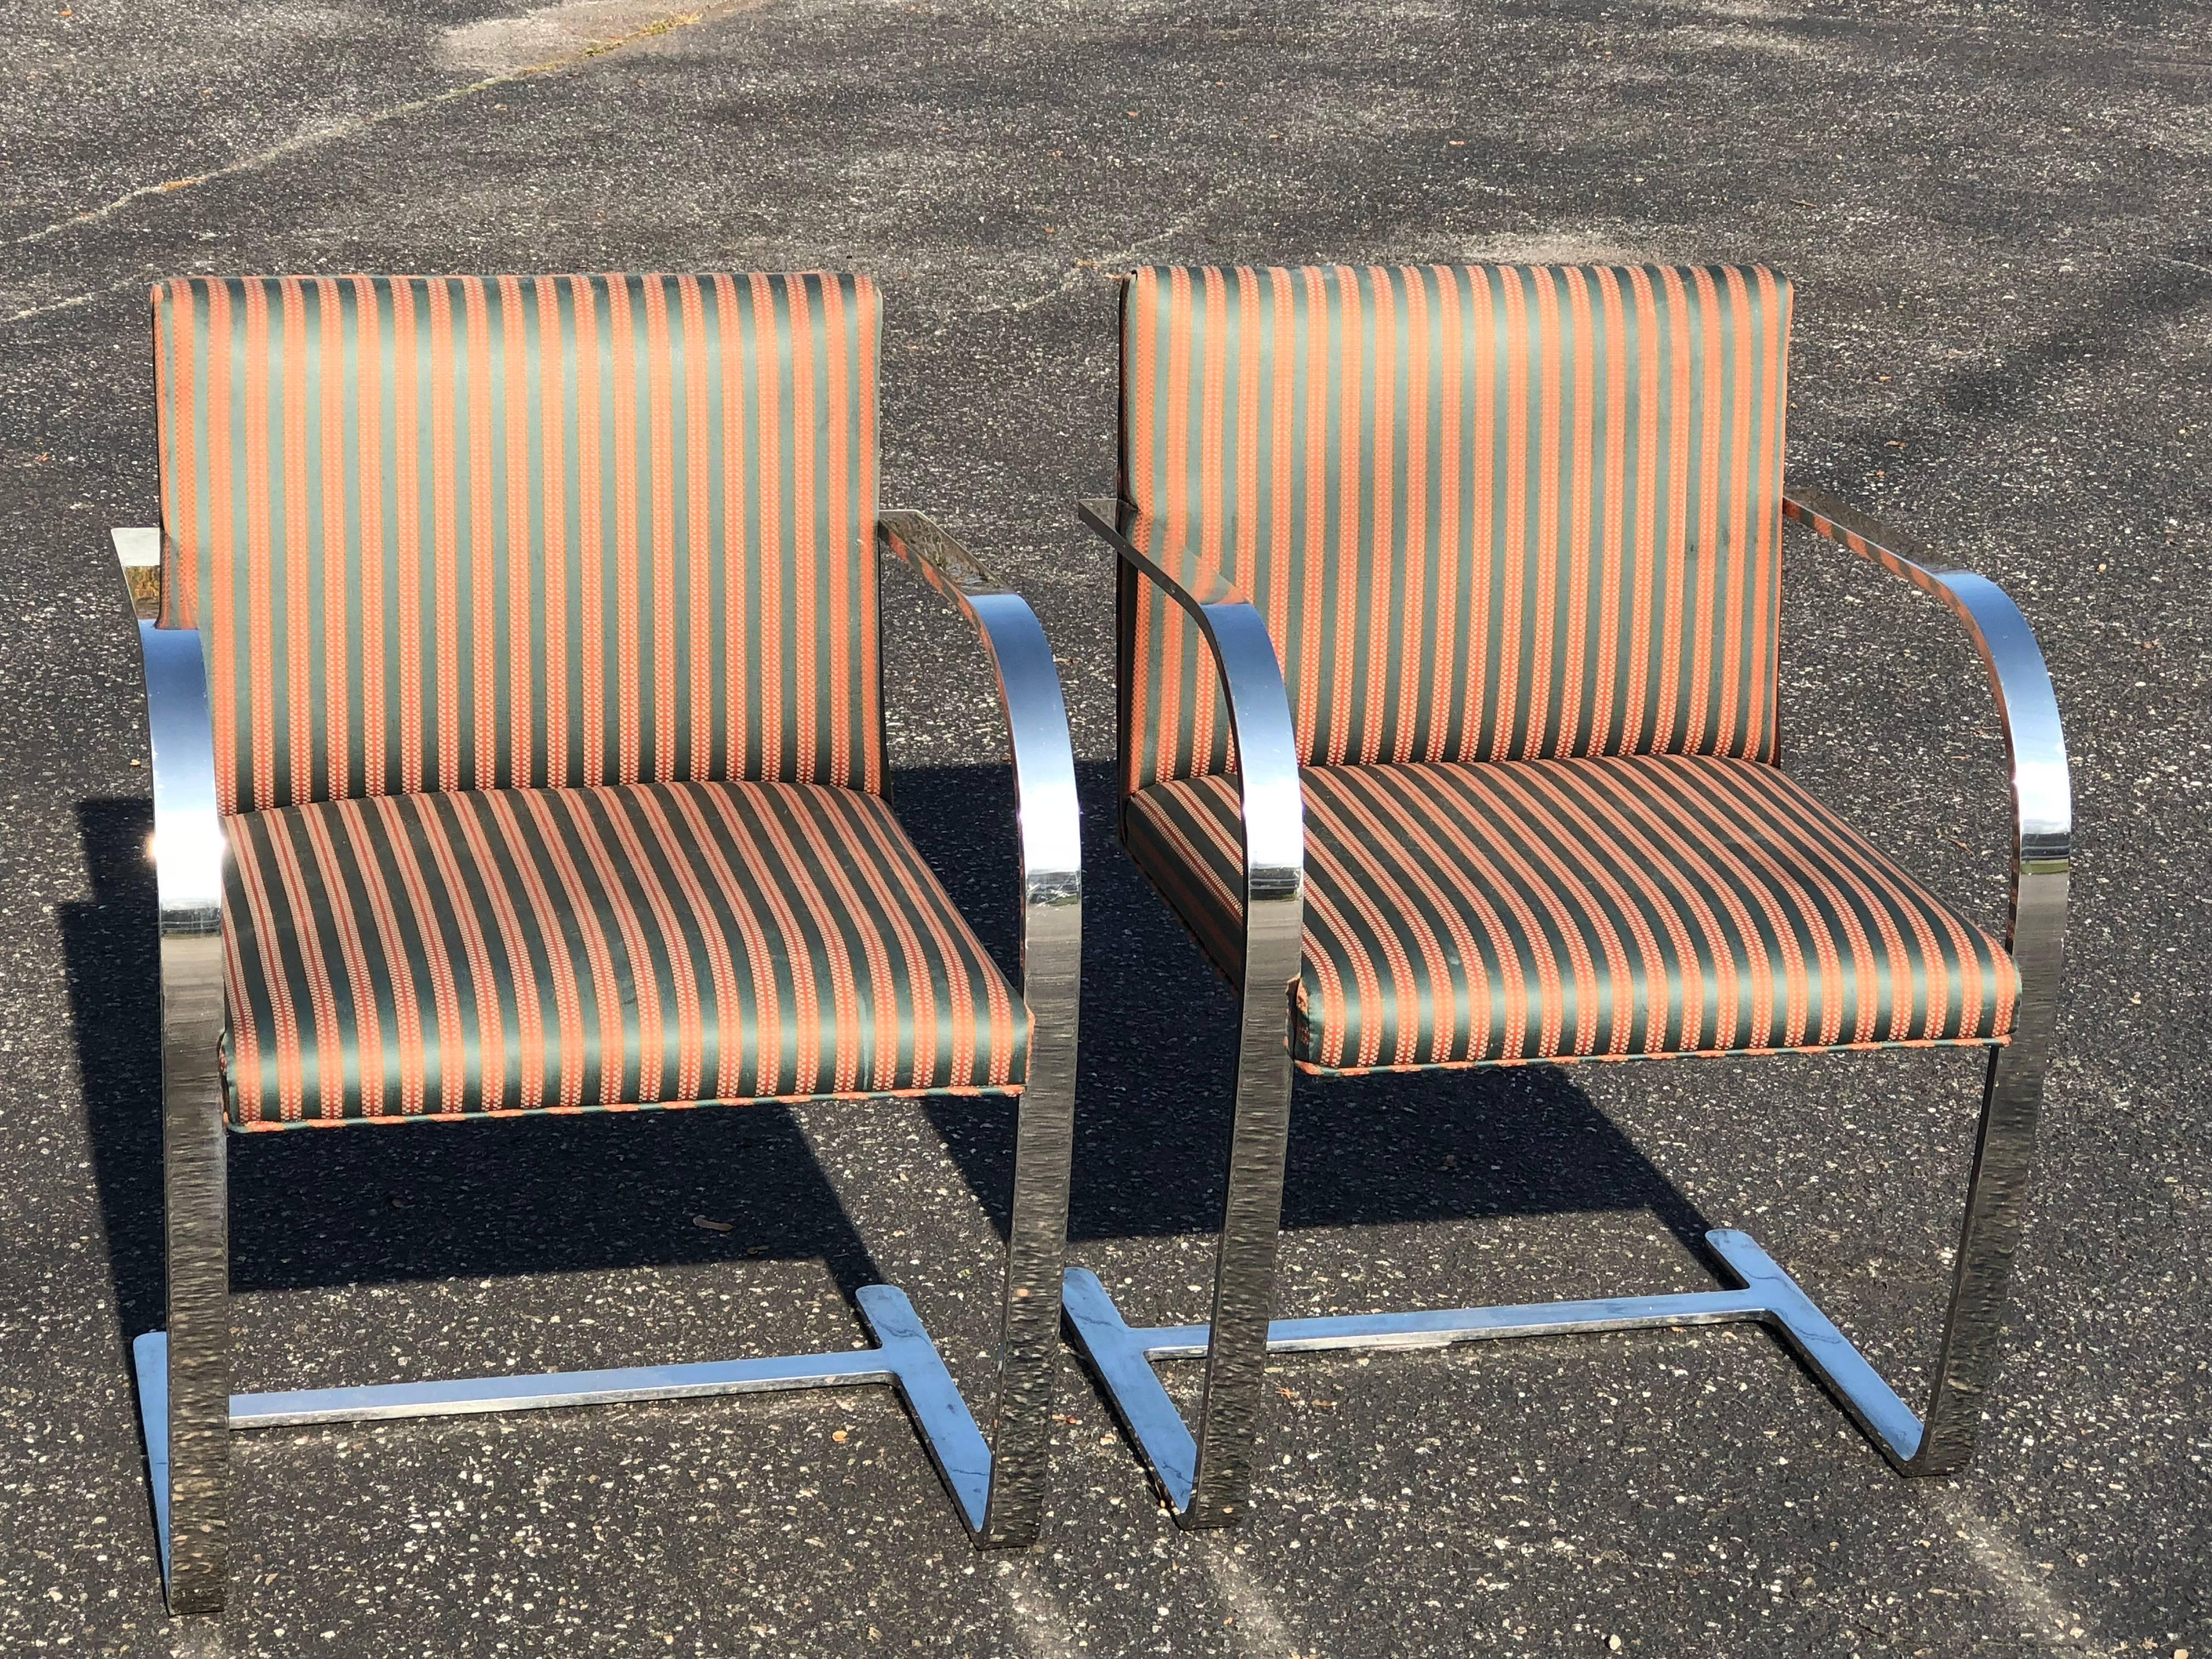 Pair of Flat Bar Brno Chairs attributed to Ludwig Mies van der Rohe for Knoll. In a nice pinstripe fabric. Can be recovered. Perfect for dining or office. Heavy, solid pieces. 